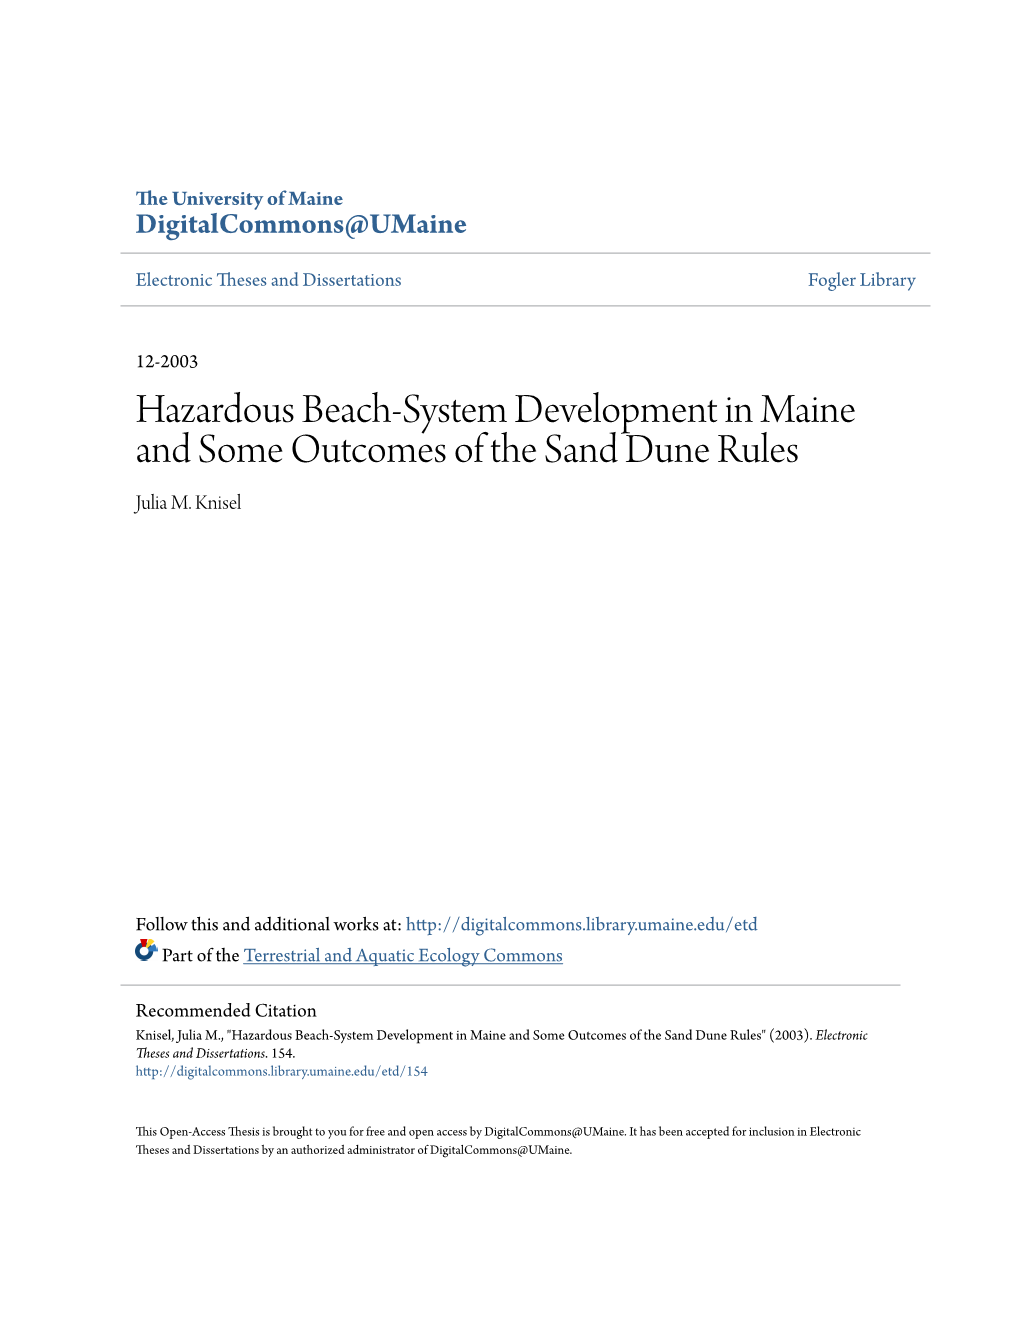 Hazardous Beach-System Development in Maine and Some Outcomes of the Sand Dune Rules Julia M